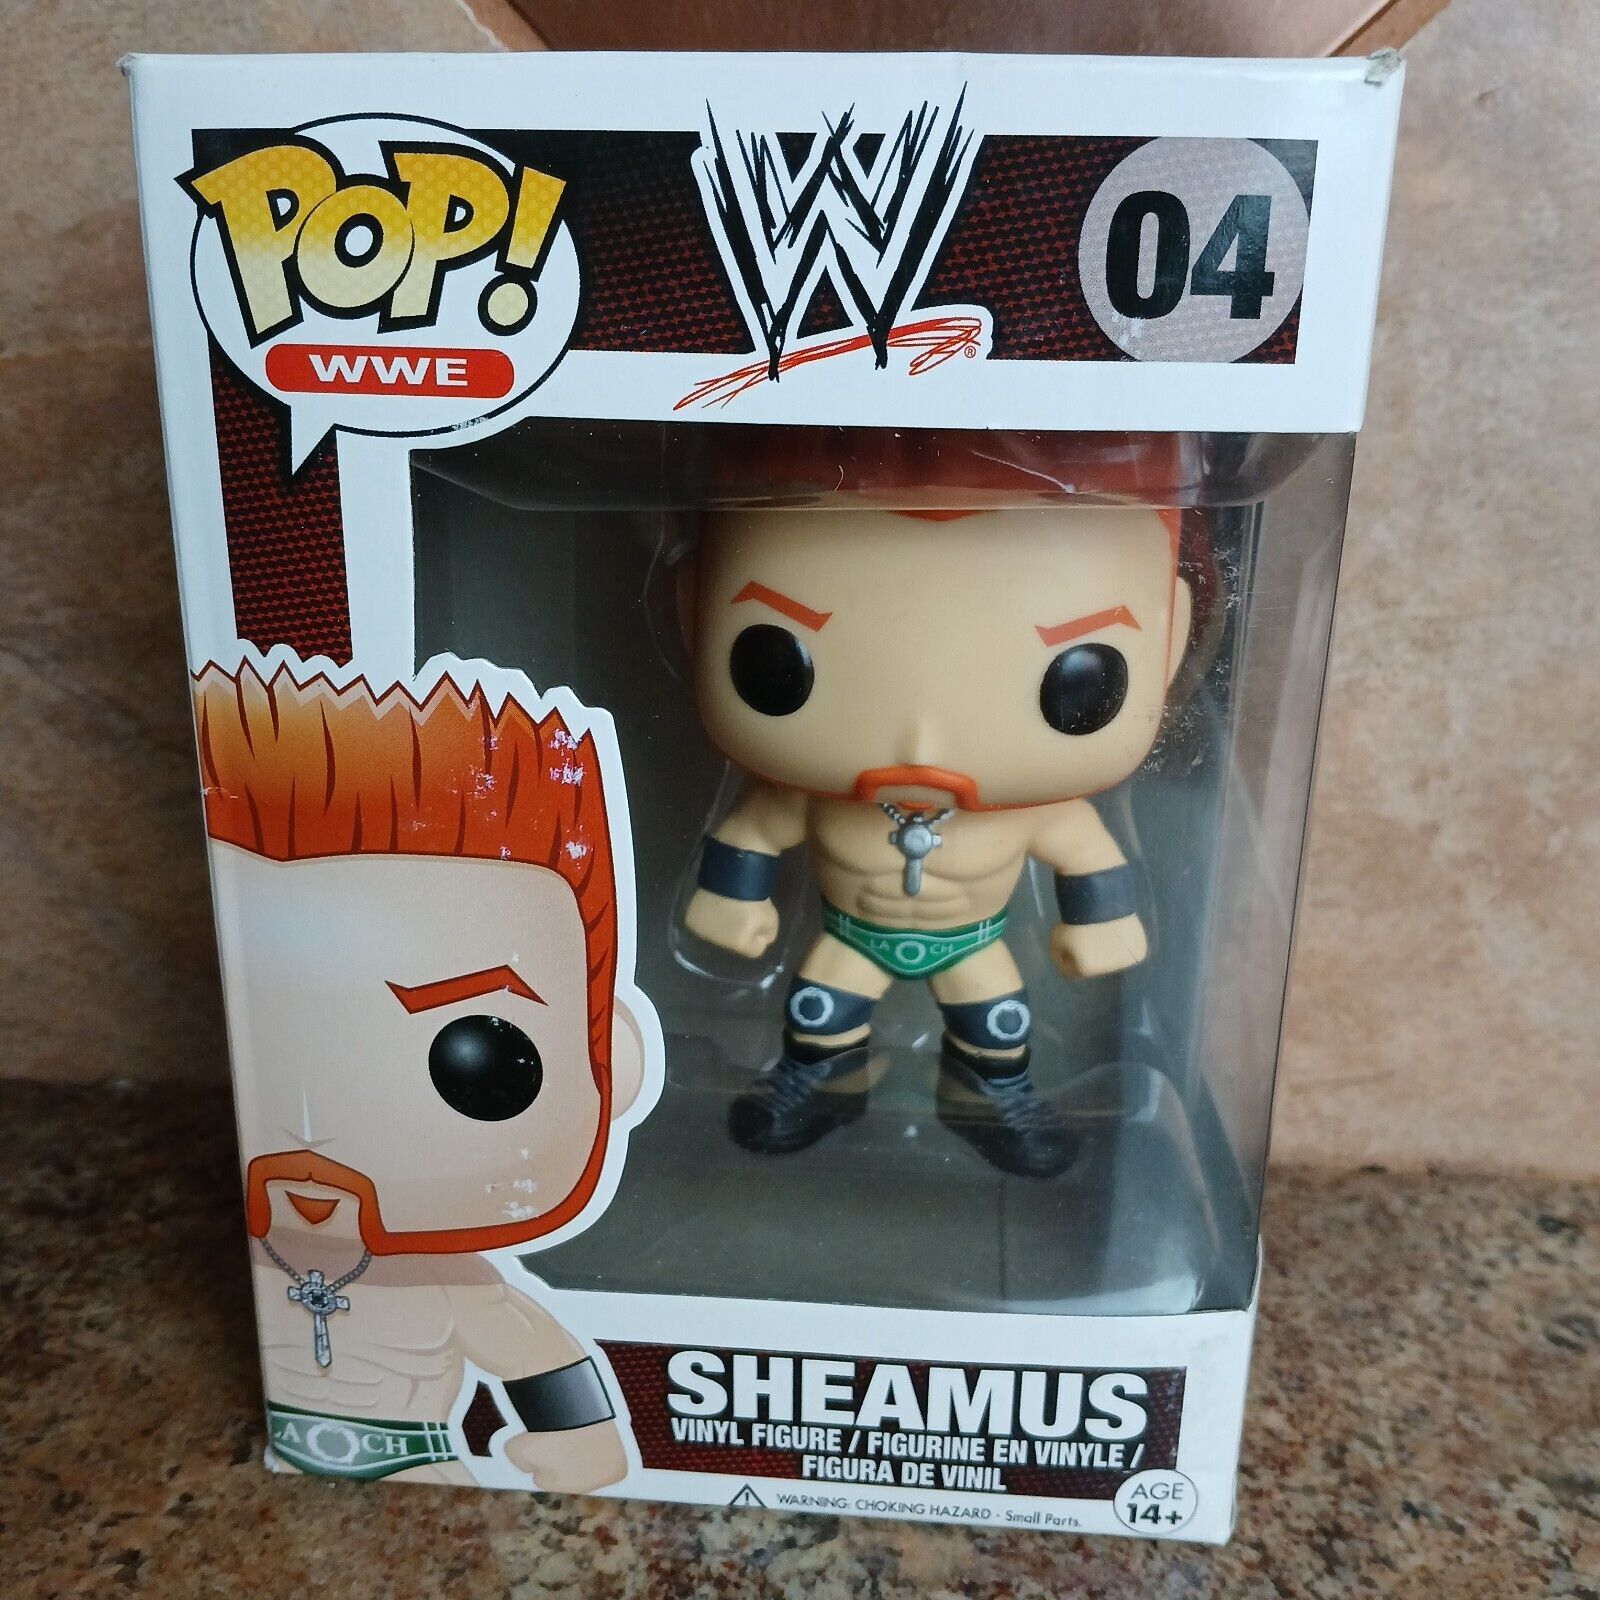 VAULTED Funko POP WWE Wrestling 04 Sheamus (2013) - Box DAMAGED with Protector